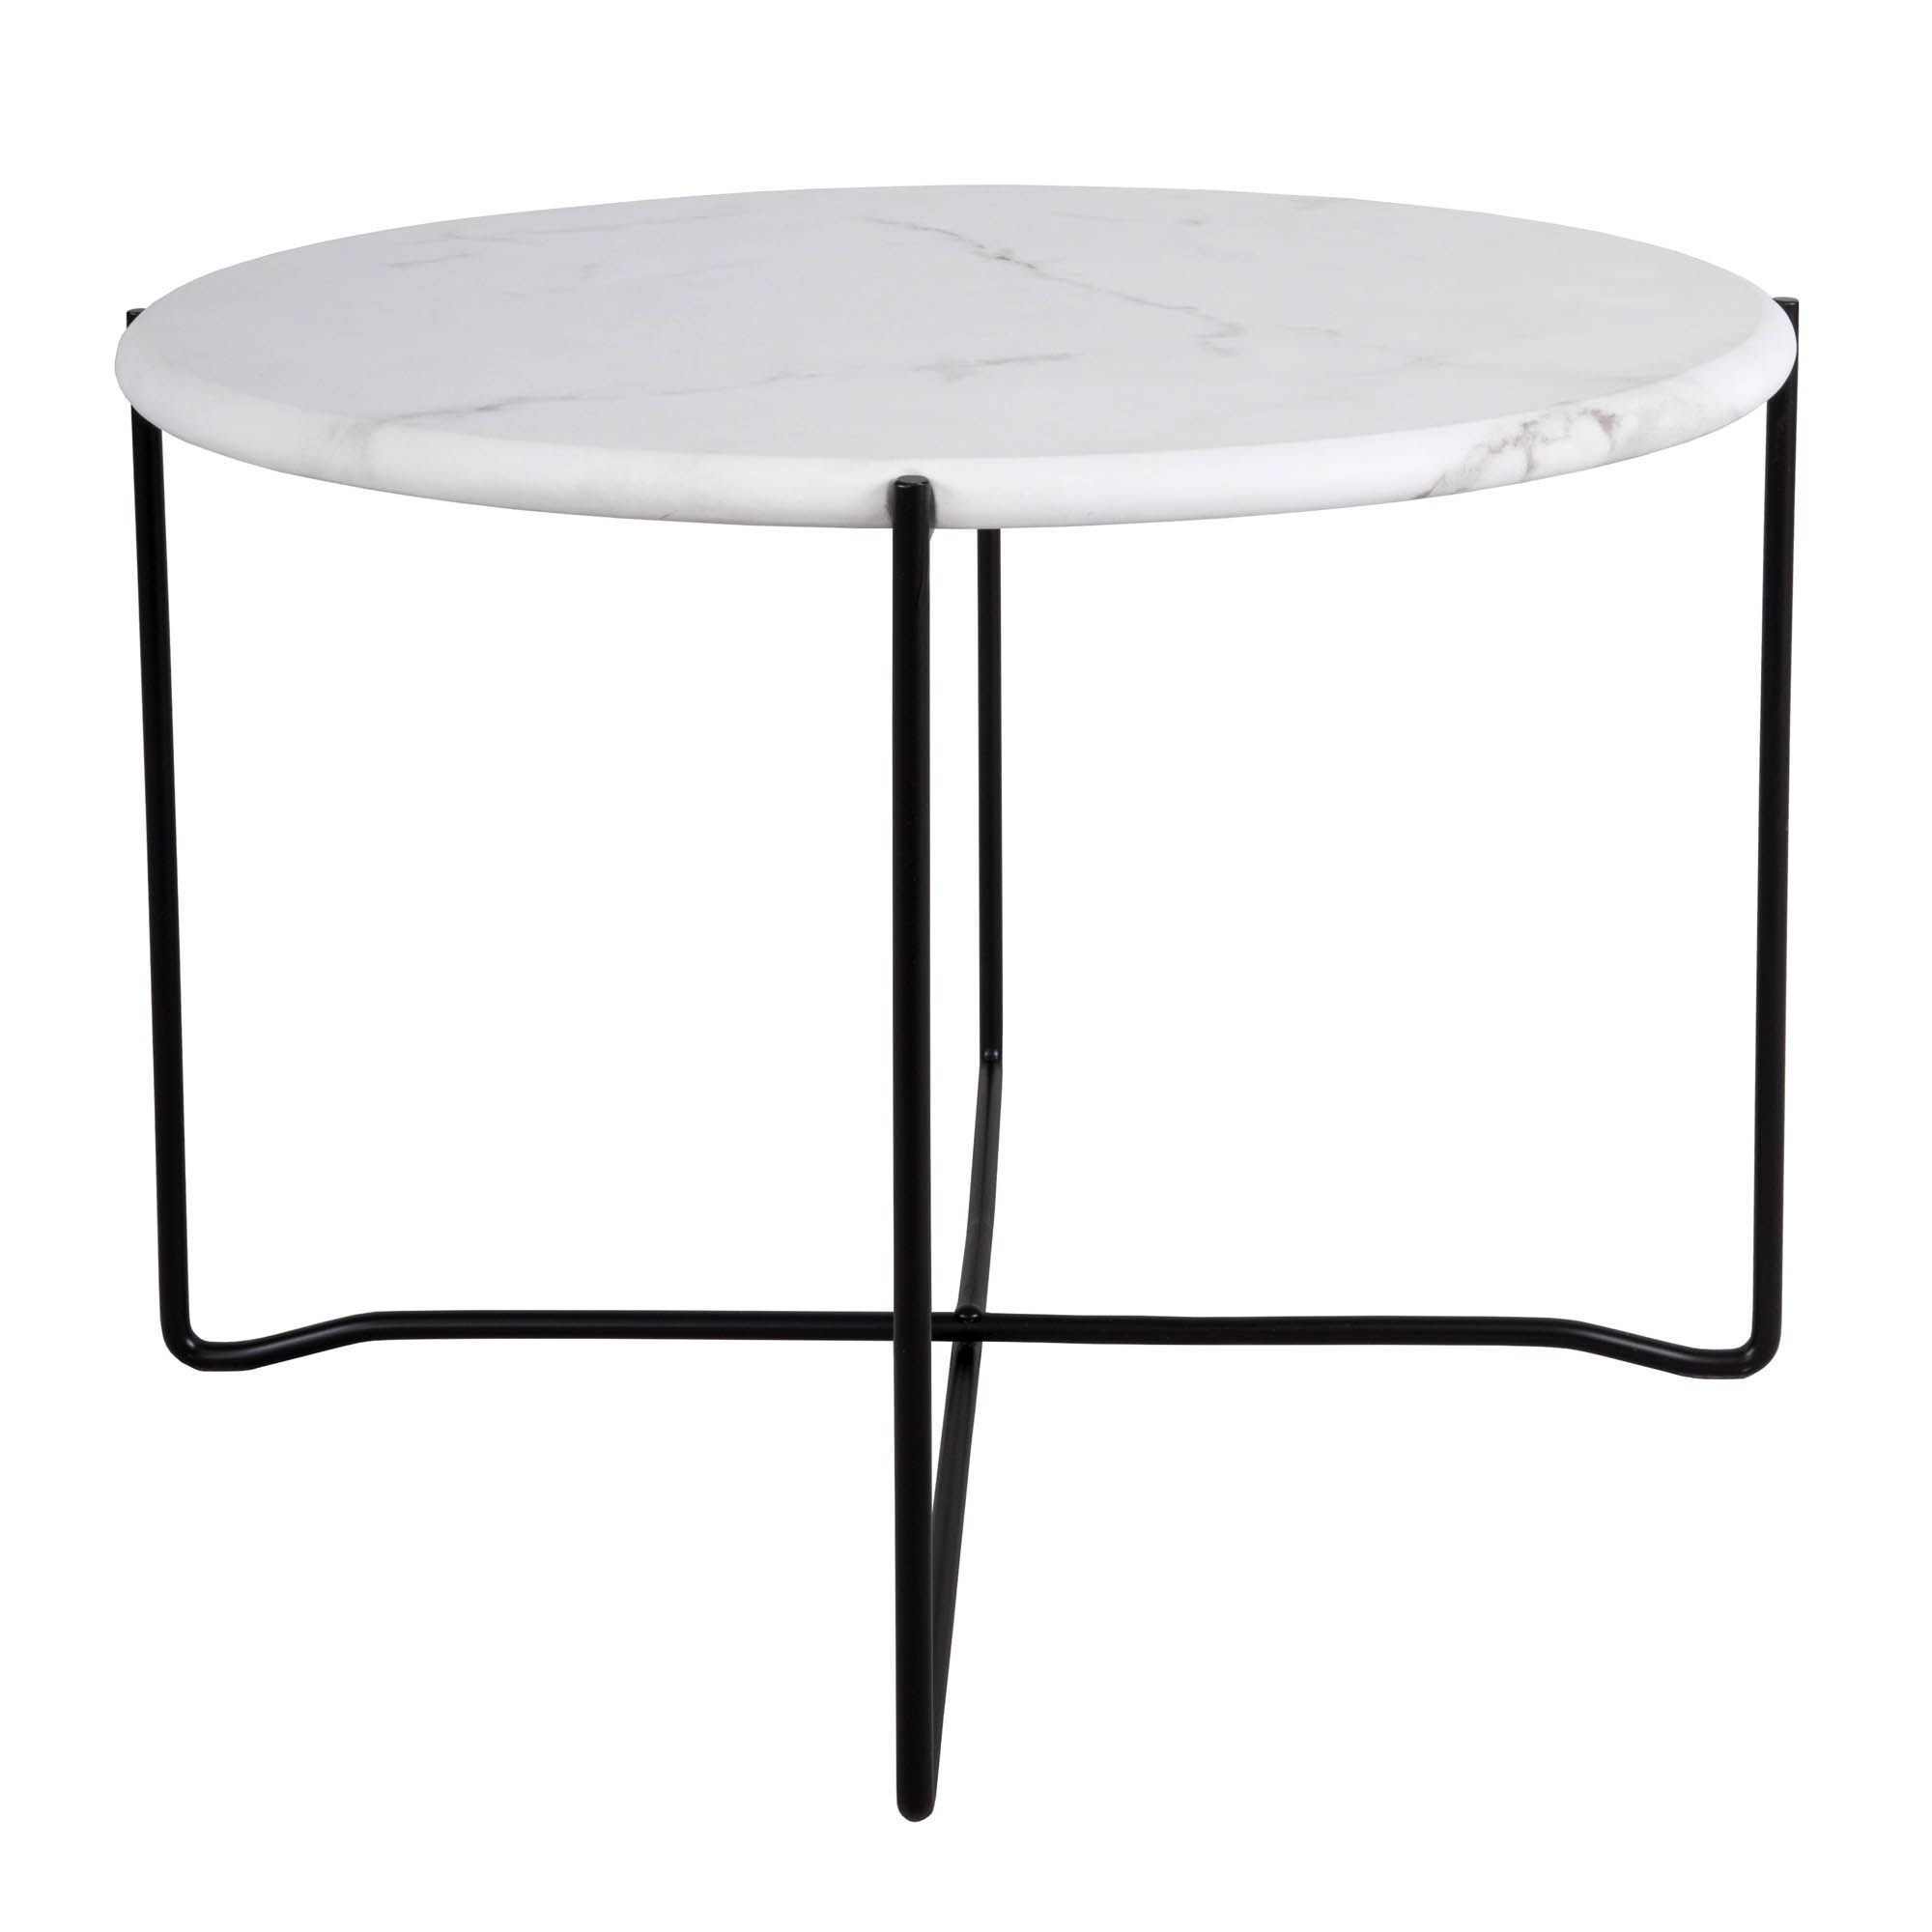 Azzate Round Coffee Table White Marble Pertaining To Popular White Stone Coffee Tables (View 5 of 20)